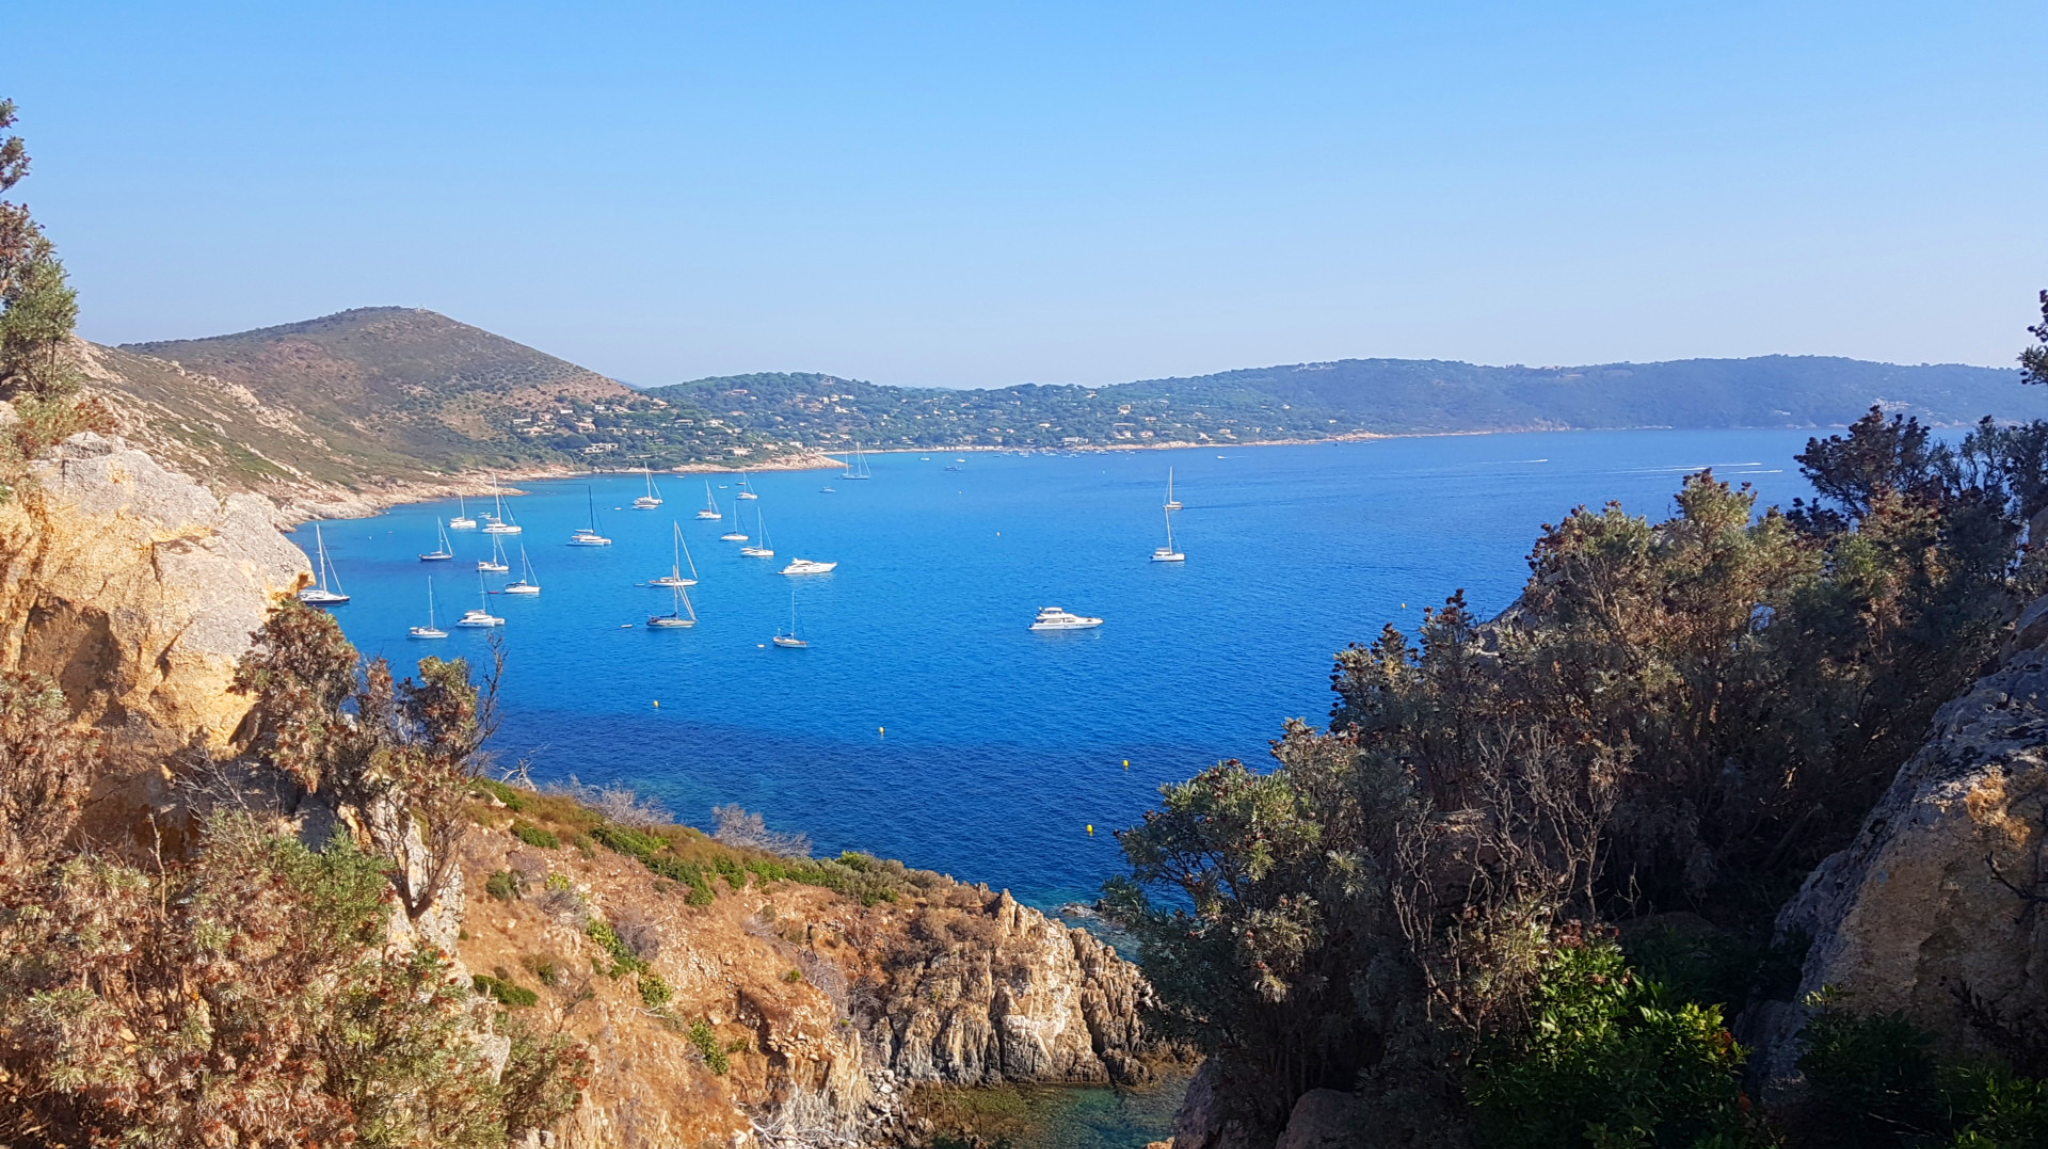 A cruise in the Pontine Islands